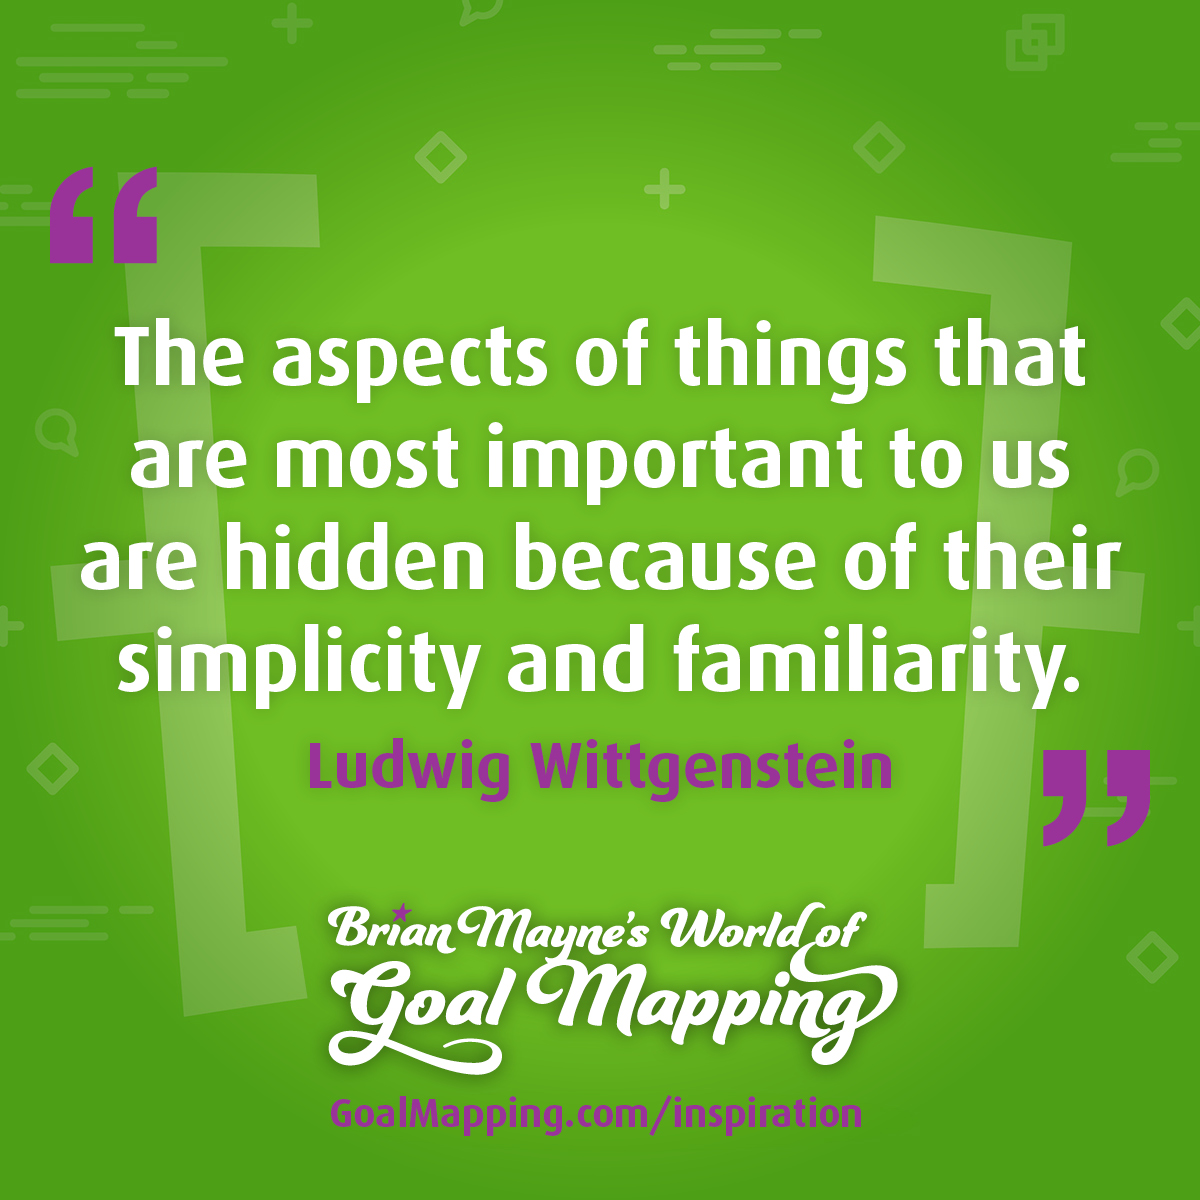 "The aspects of things that are most important to us are hidden because of their simplicity and familiarity." Ludwig Wittgenstein